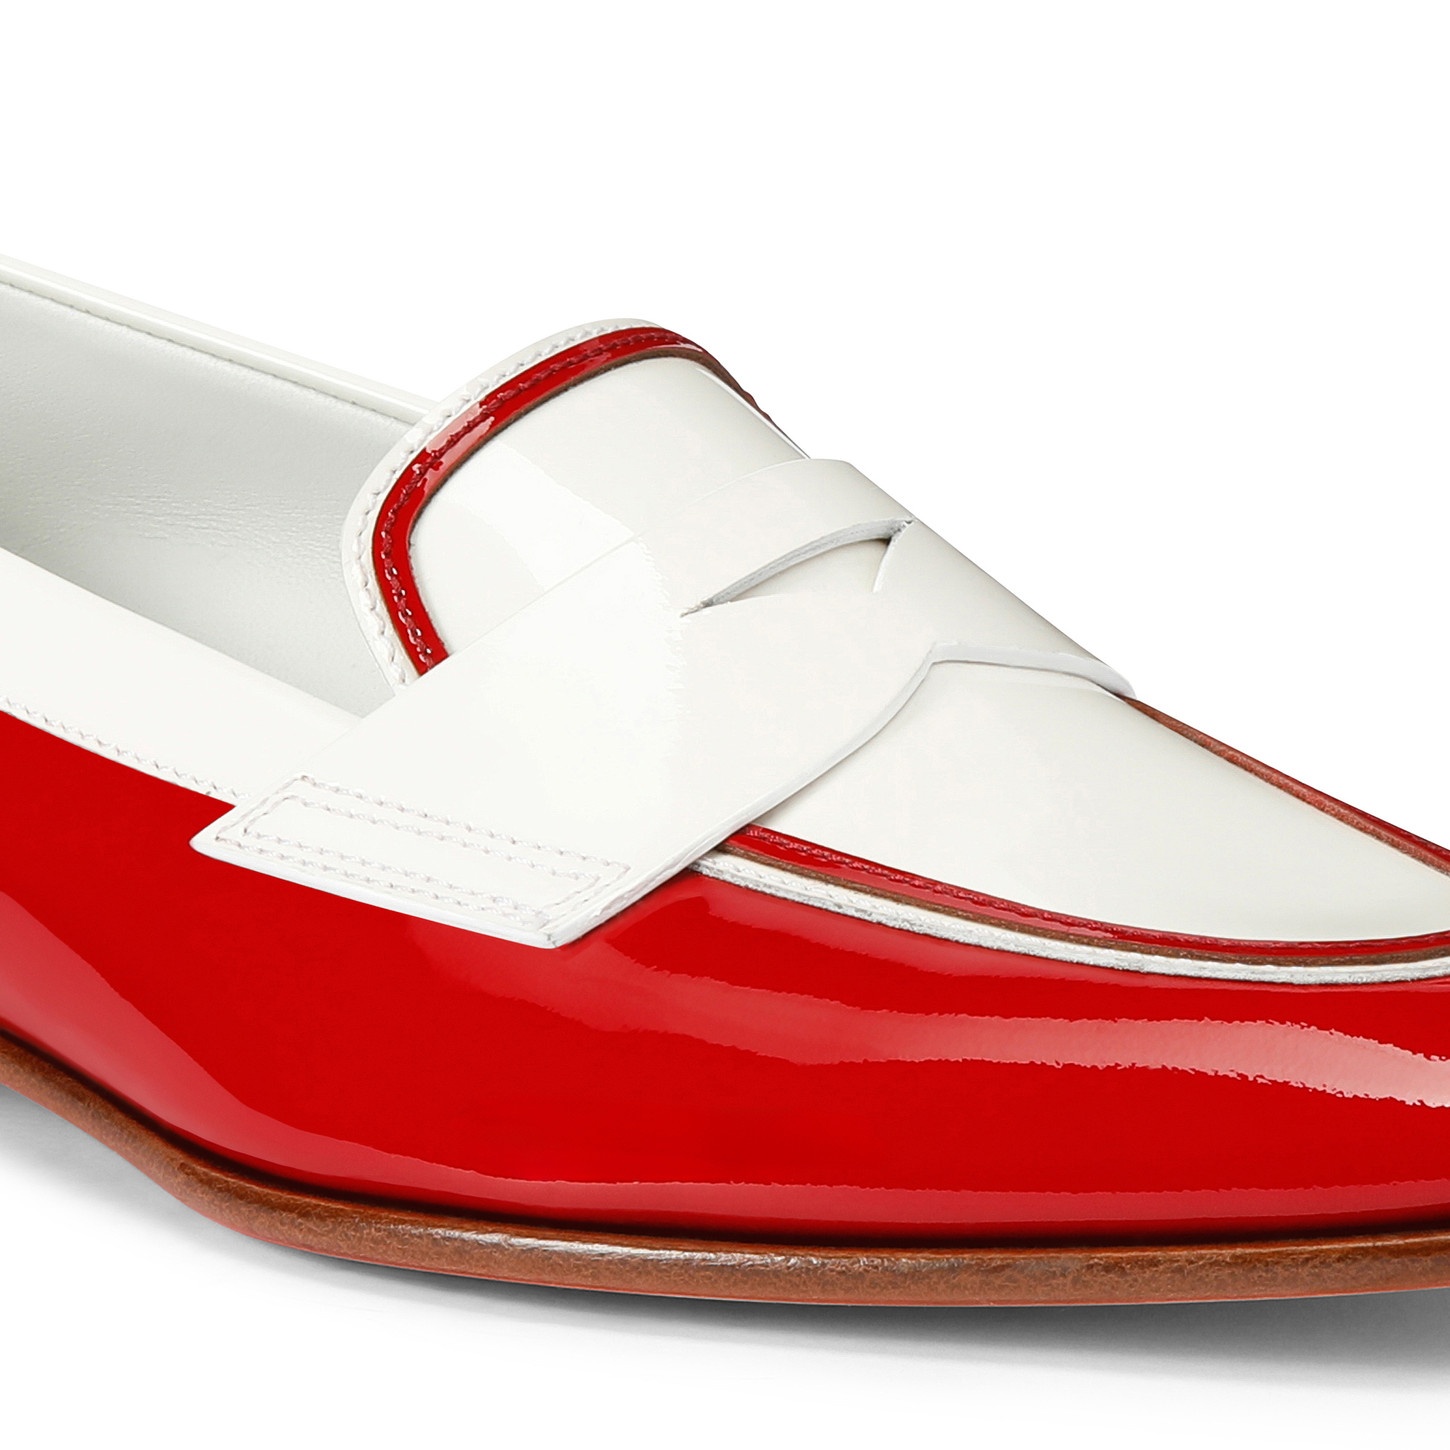 Women's red and white patent leather penny loafer - 6